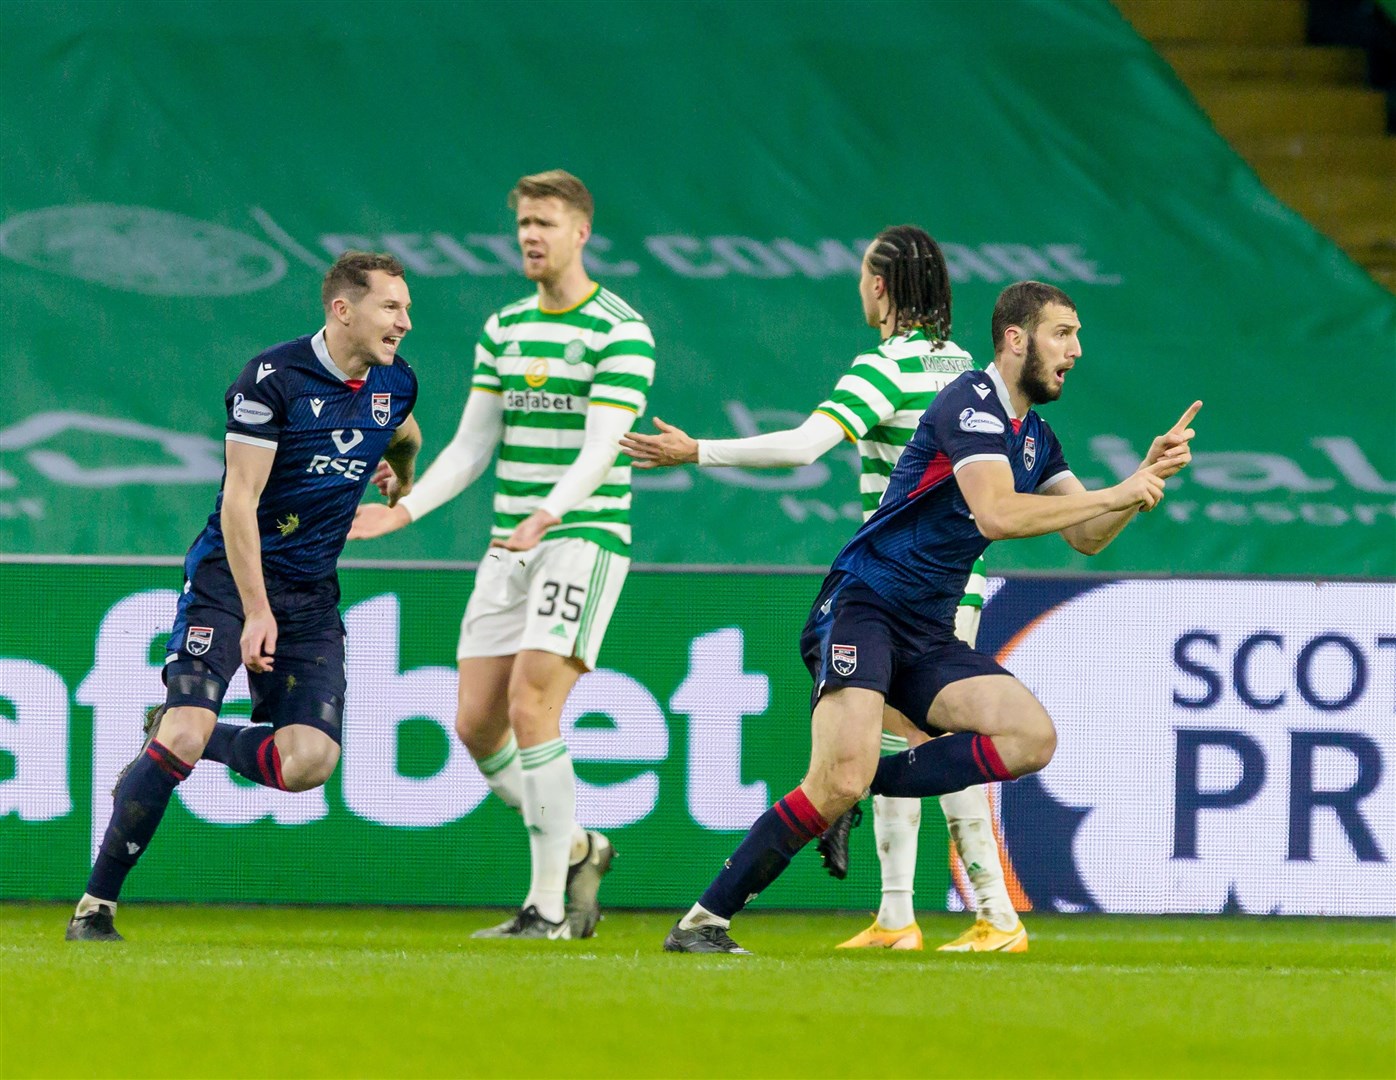 Picture - Ken Macpherson, Inverness. Scottish League Cup 2nd Round. Celtic(0) v Ross County(2). 29.11.20. Ross County's Alex Iacovitti celebrates his goal.